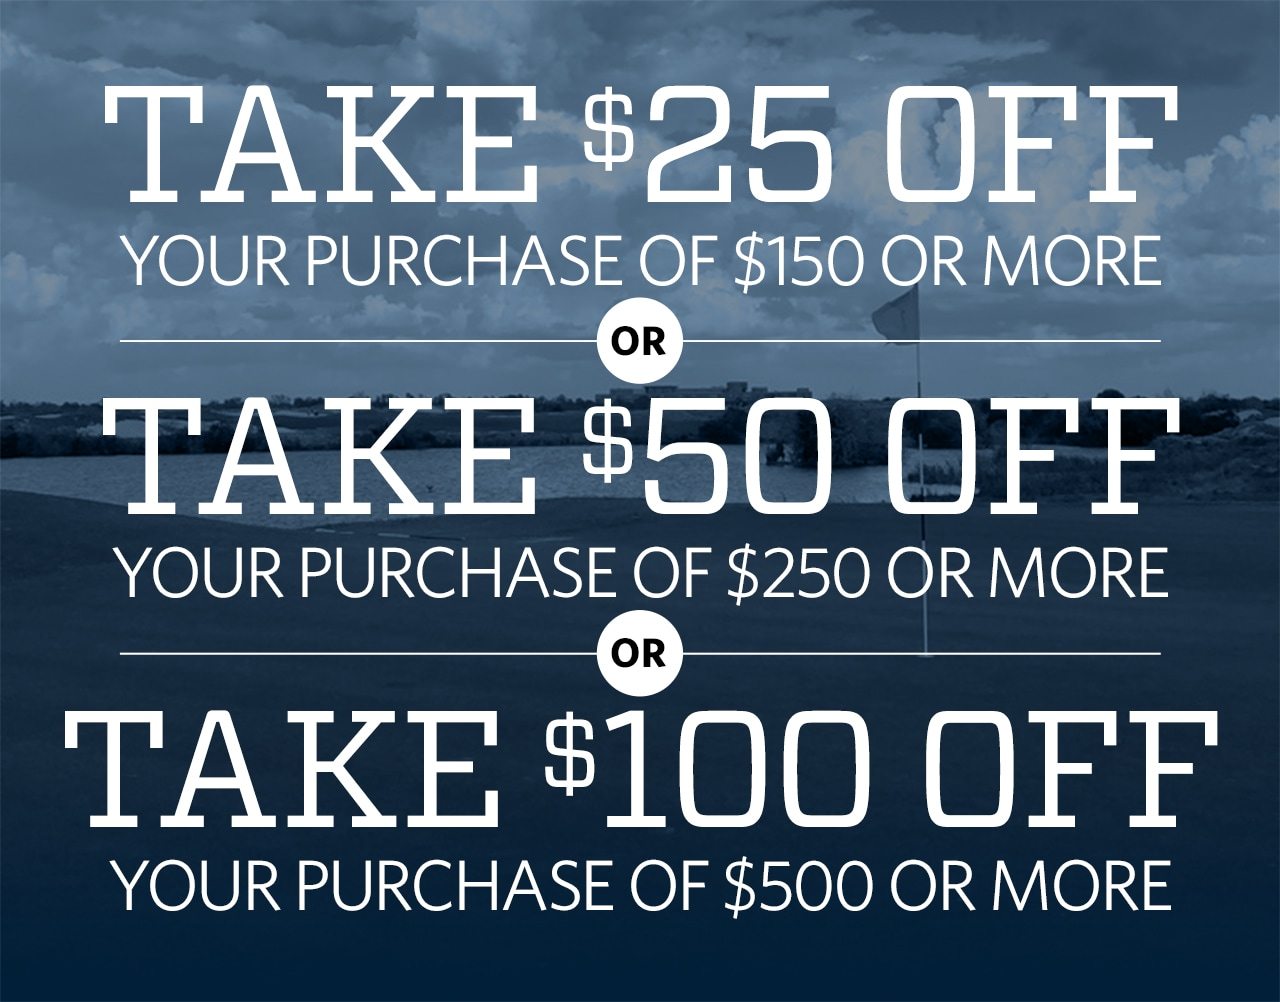 Take $100 Off Your Purchase of $500 or More or Take $50 Off Your Purchase of $250 or More or Take $25 Off Your Purchase of $150 or More**